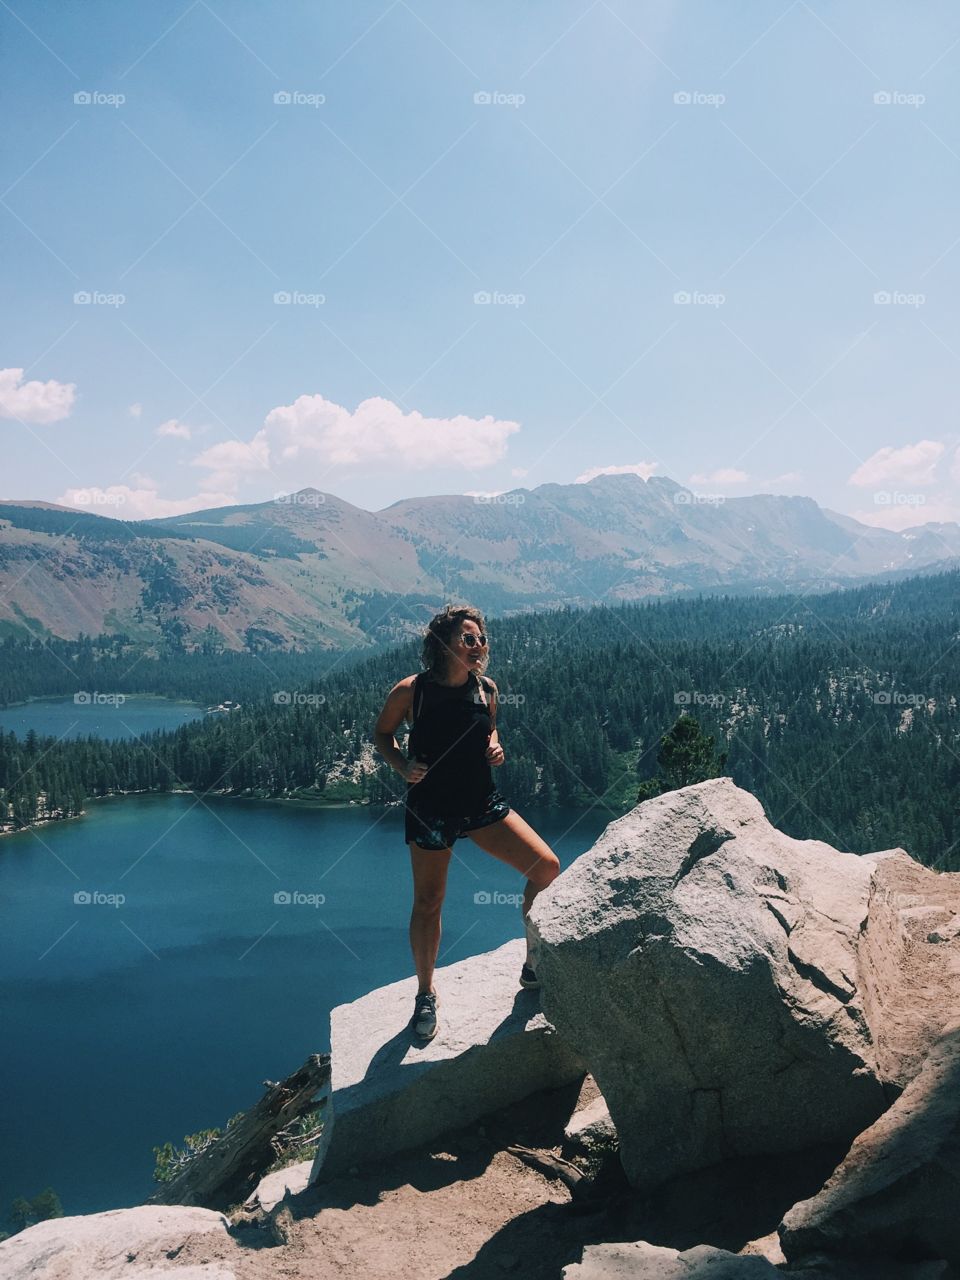 hiking in mammoth lakes, ca